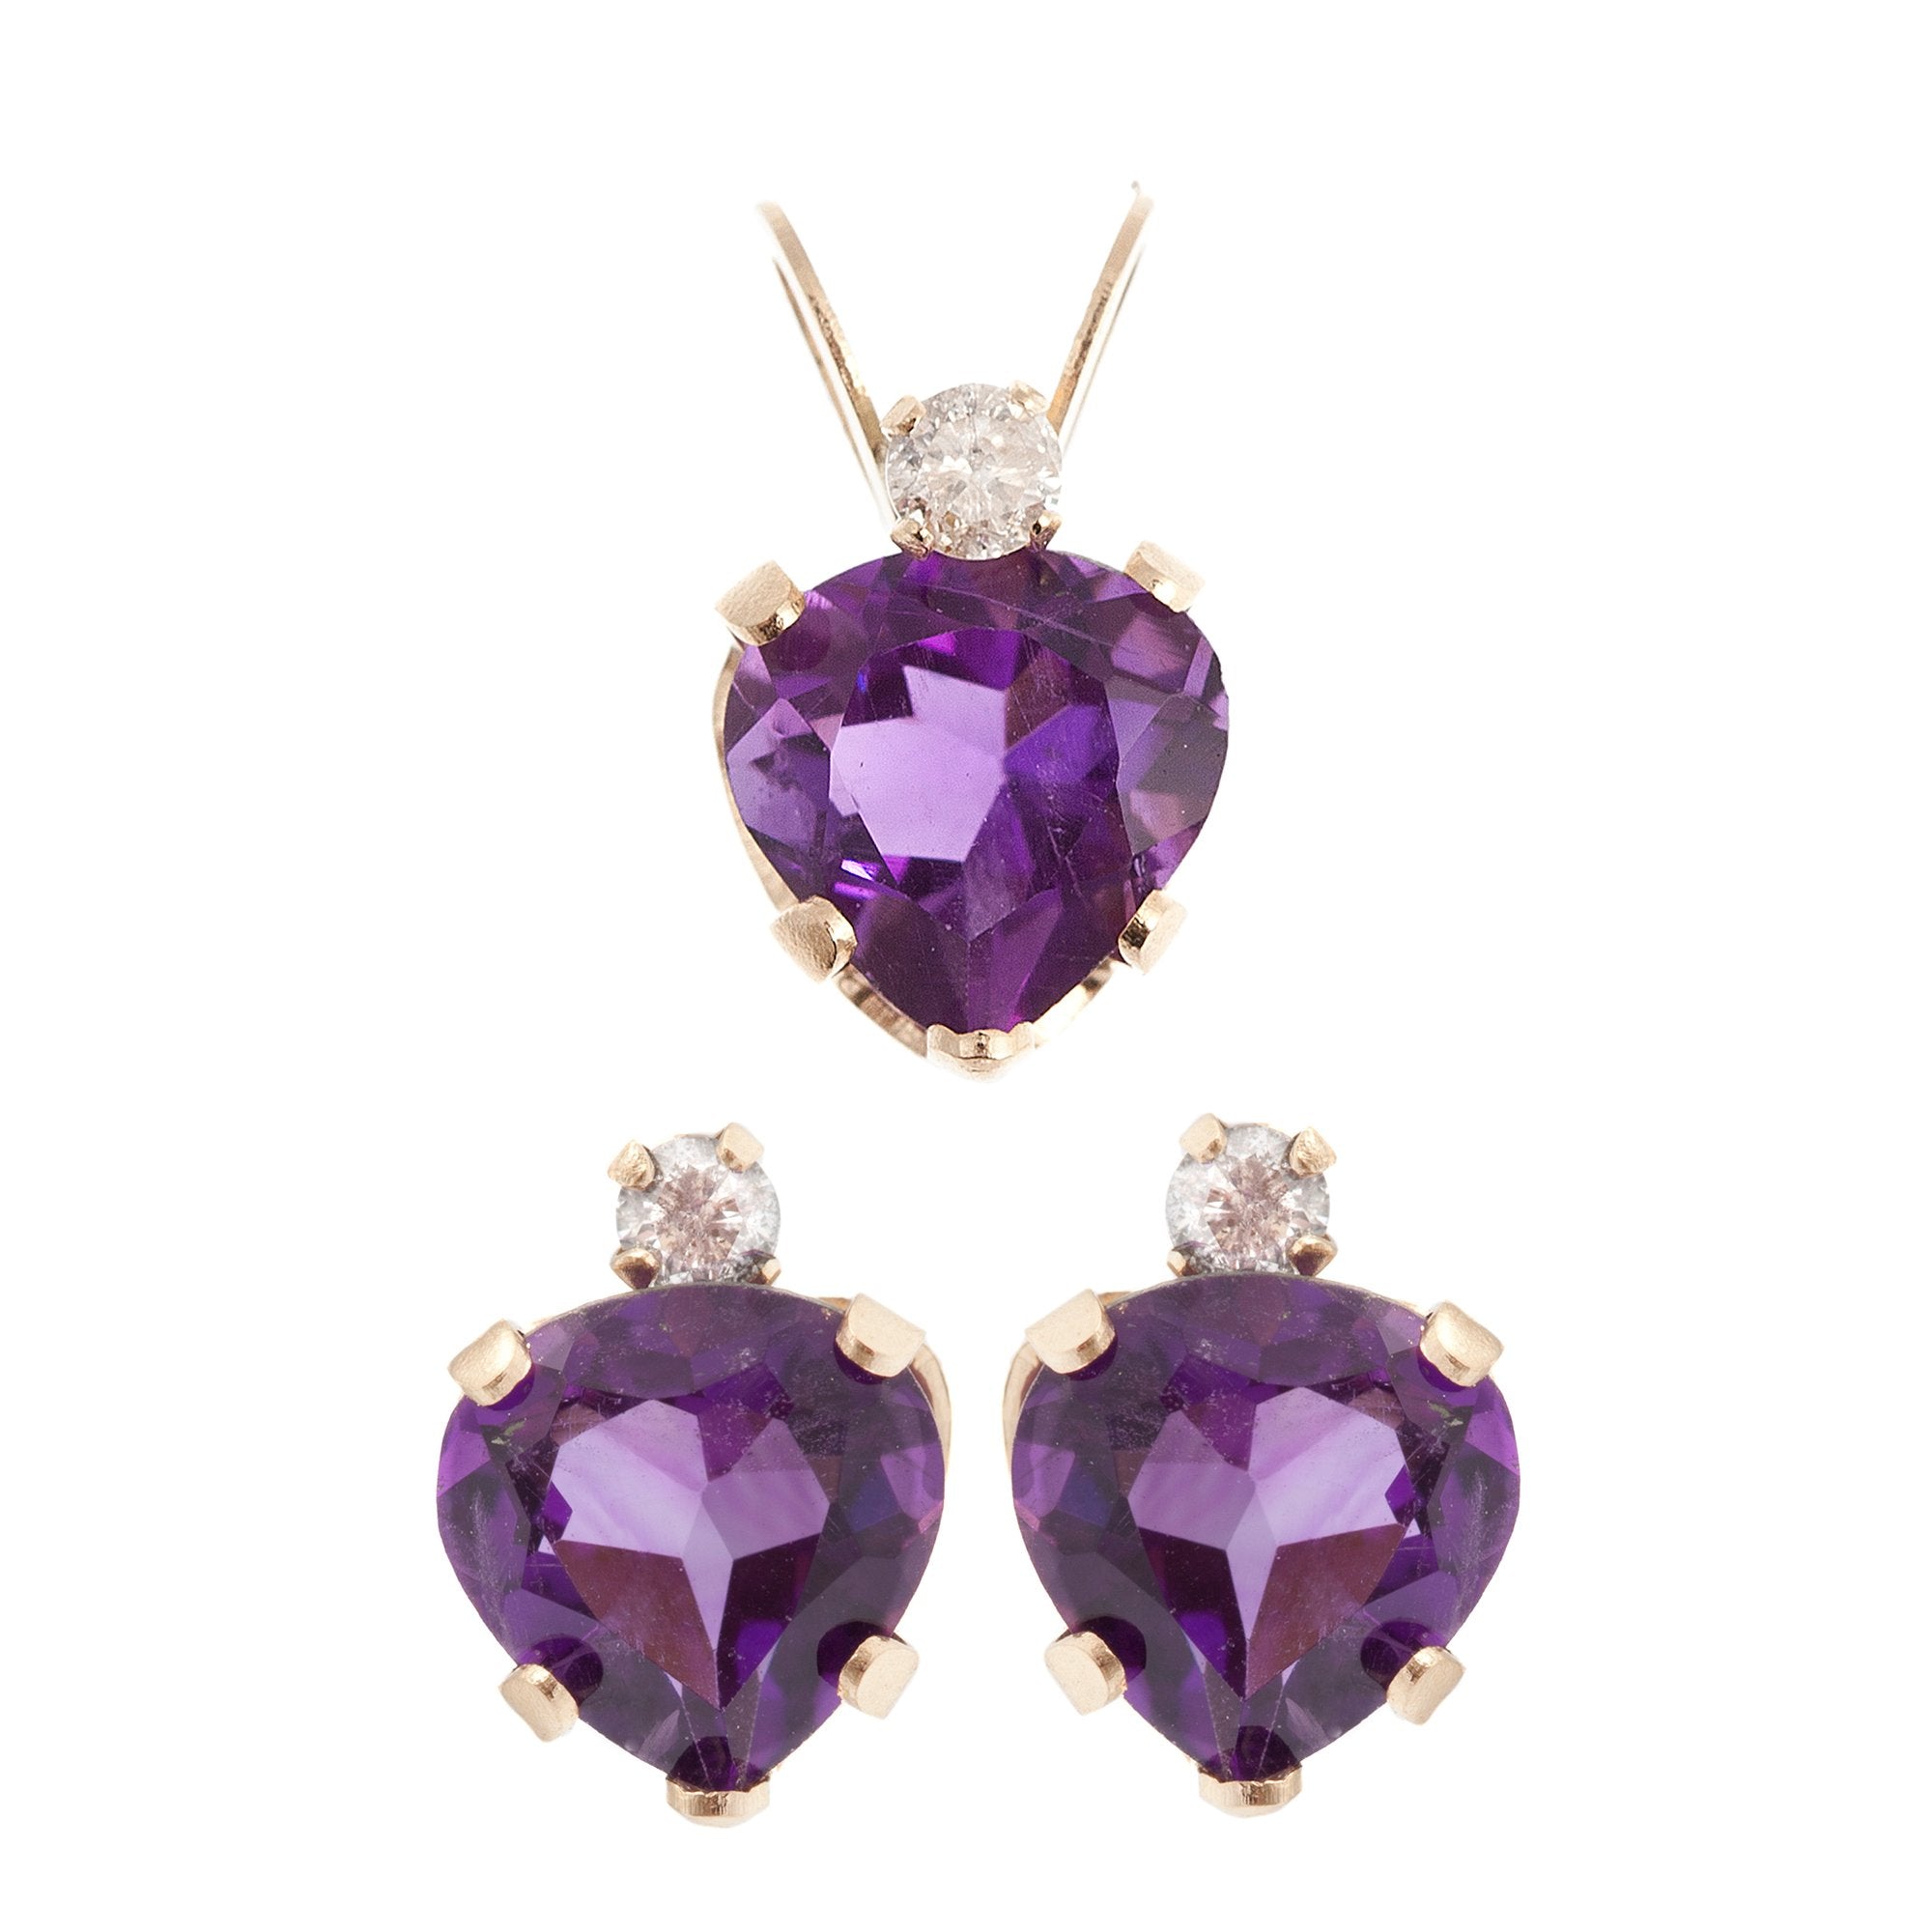 10KT Yellow Gold Genuine Amethyst Heart shaped Pendant and Earrings Set